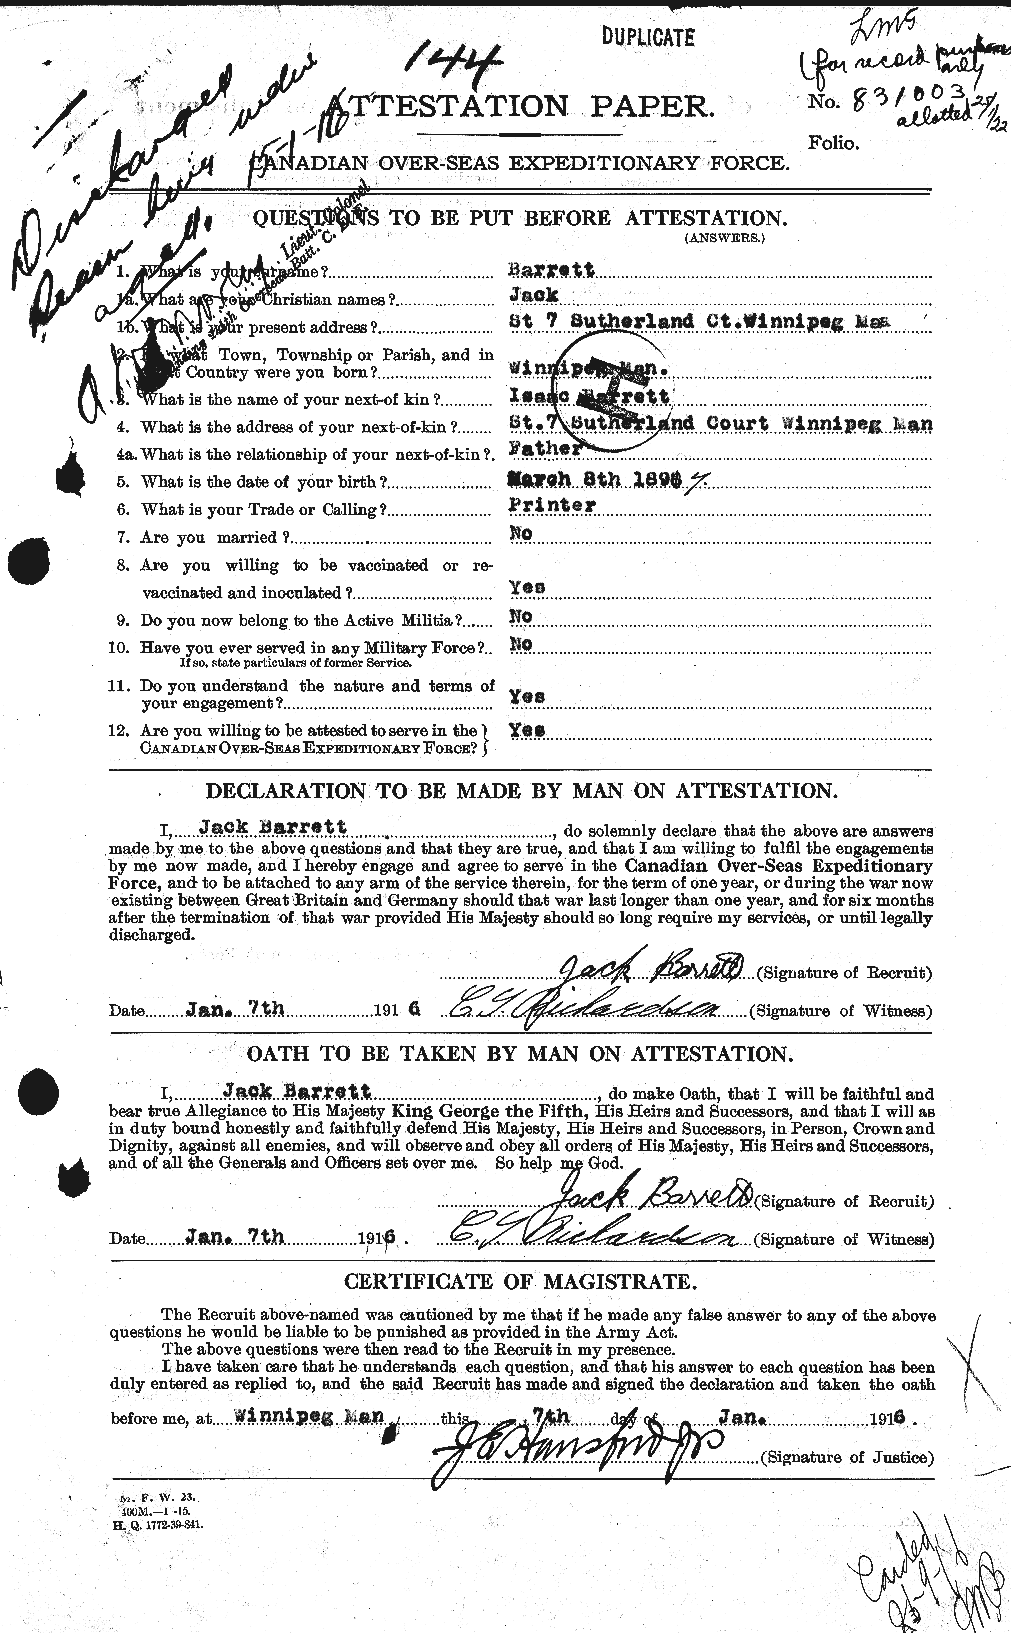 Personnel Records of the First World War - CEF 220268a